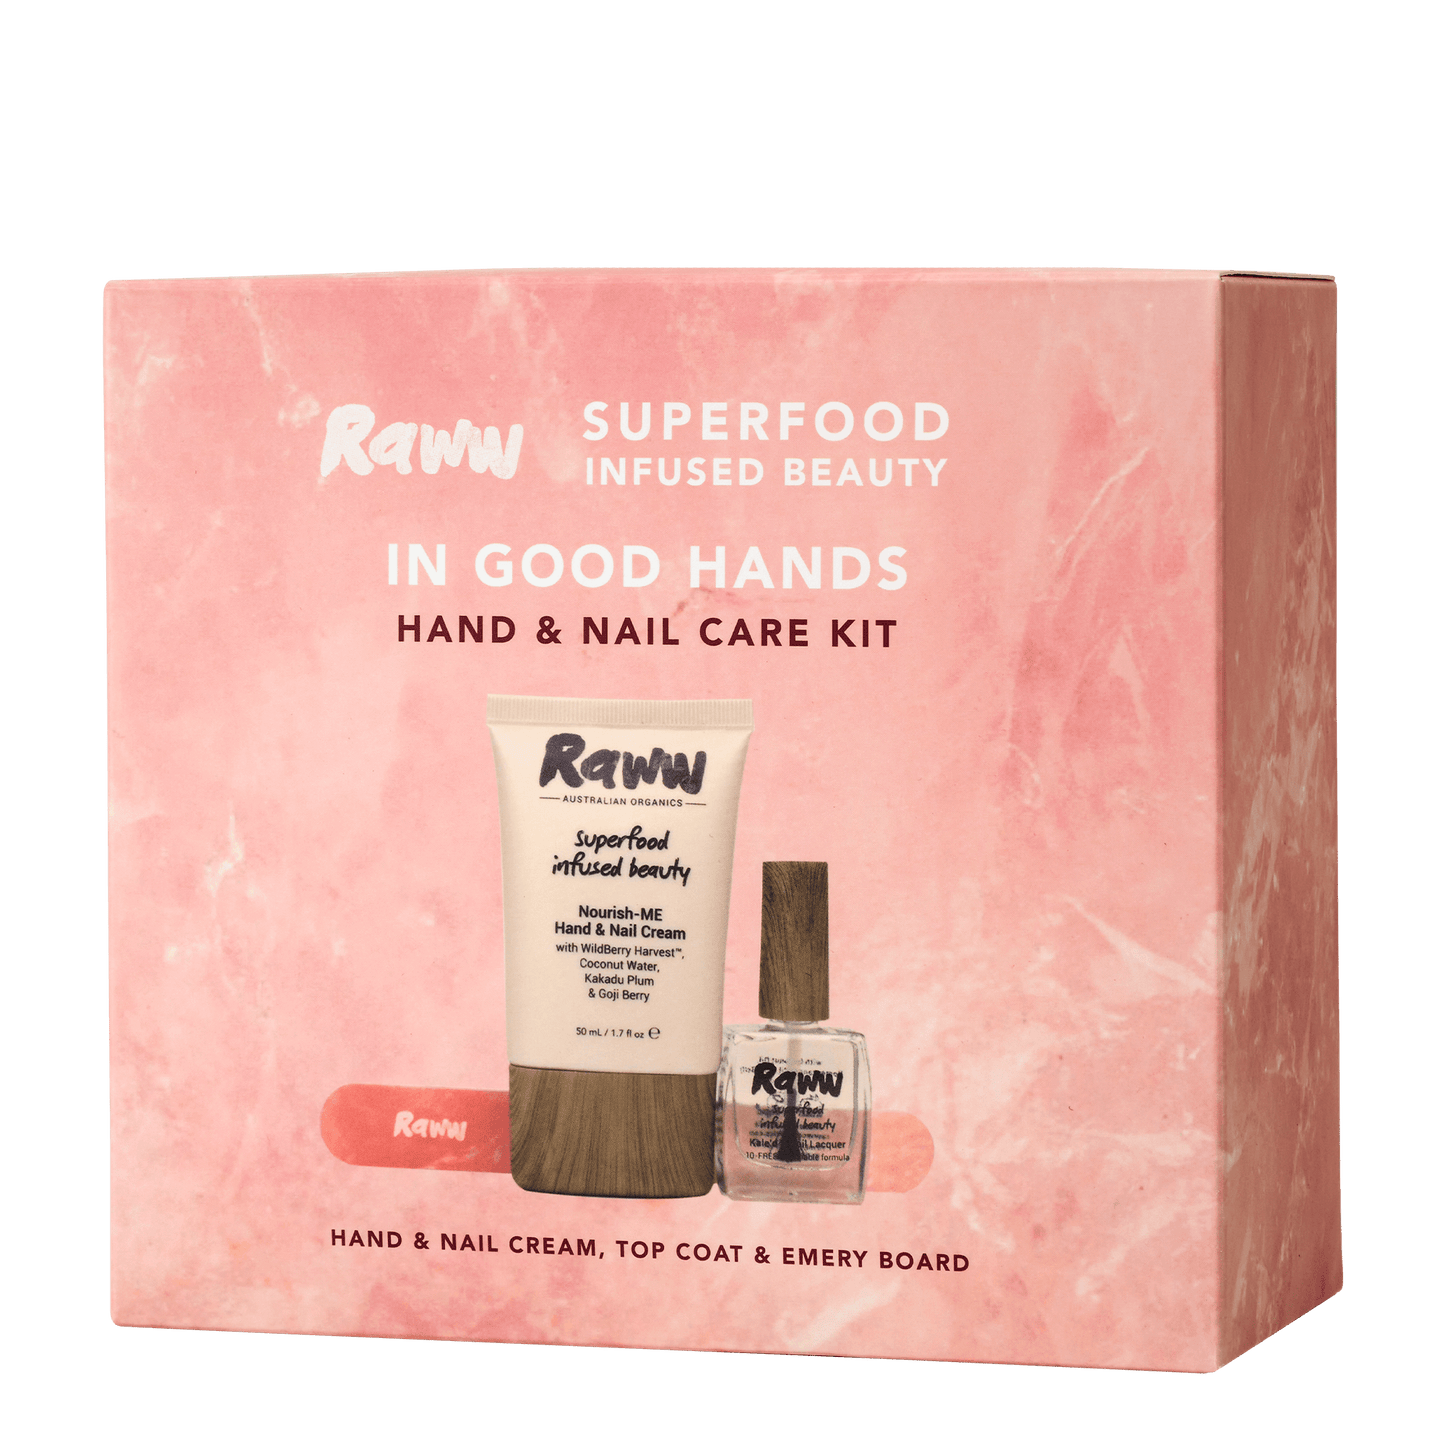 In Good Hands Hand & Nail Care Kit